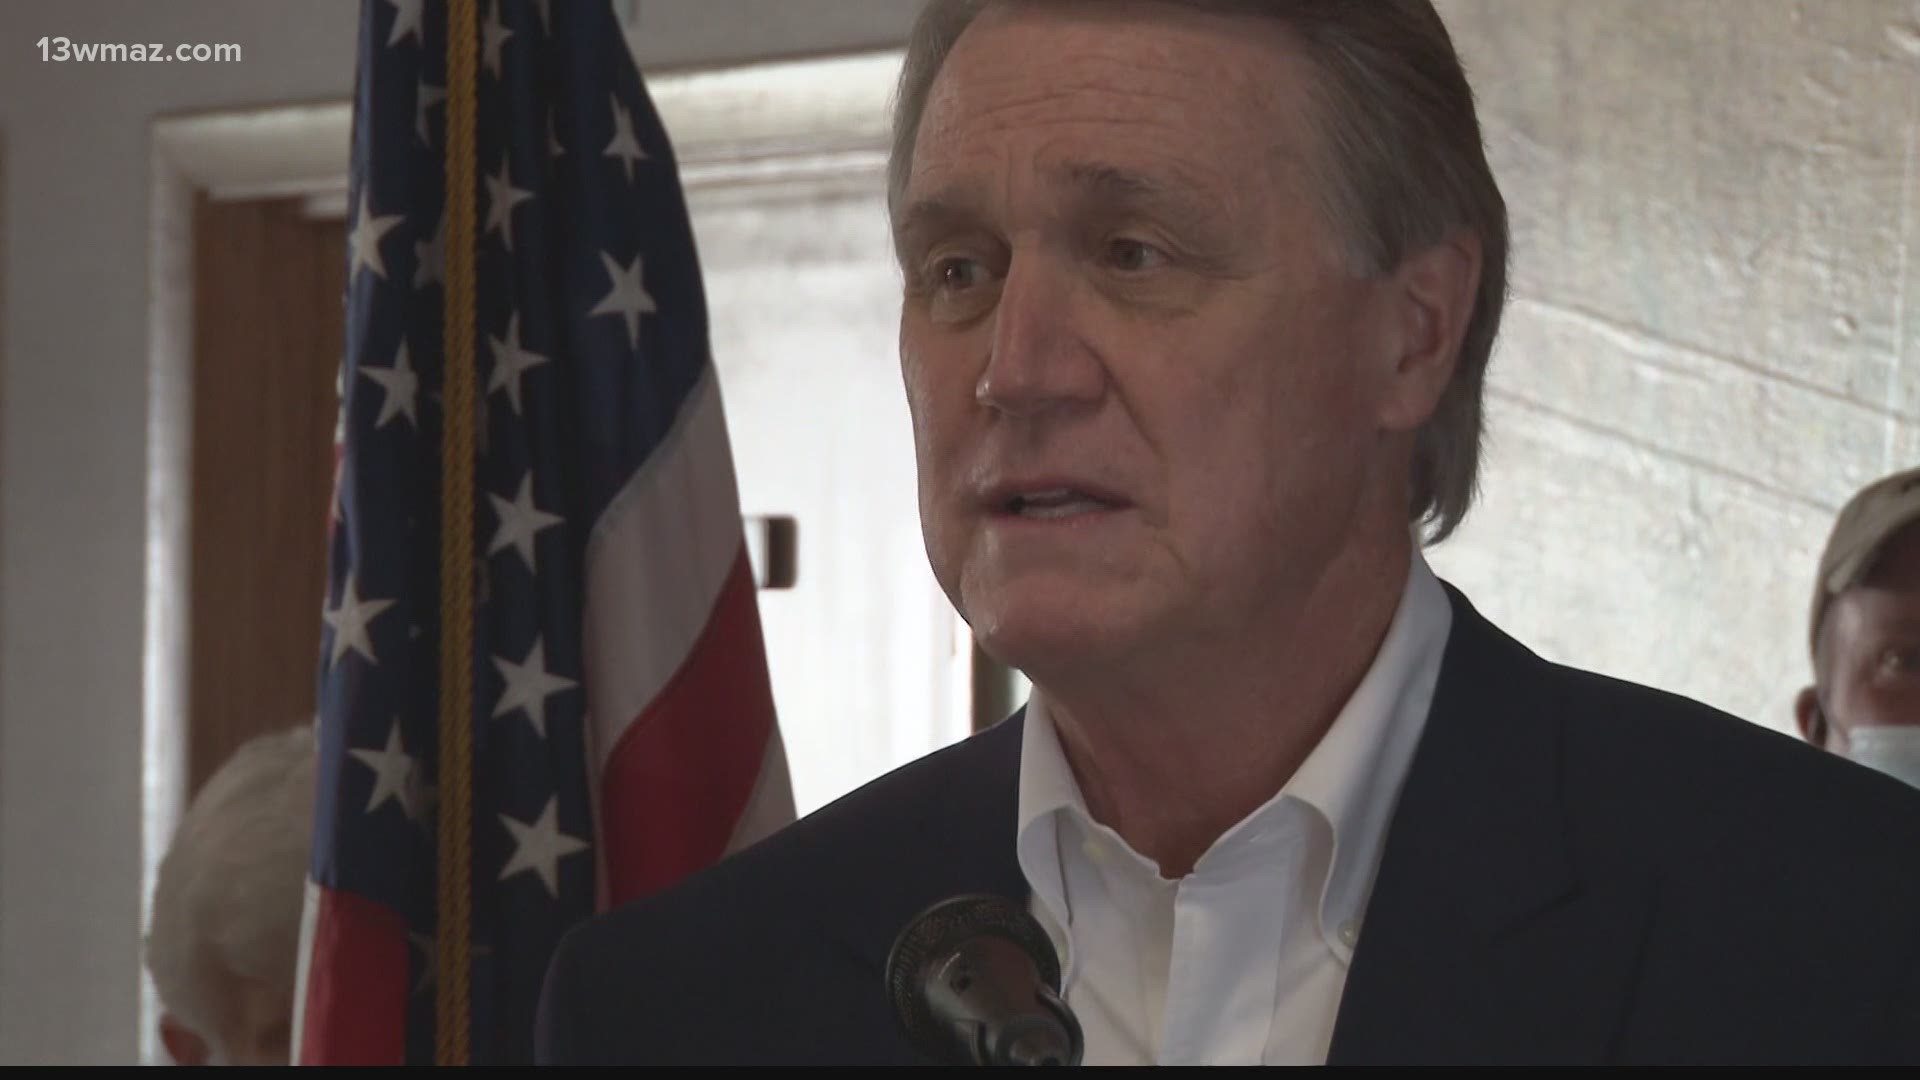 Ahead of Election Day, Georgia Senator David Perdue flew across the state to meet with local leaders and supporters about the importance of voting.